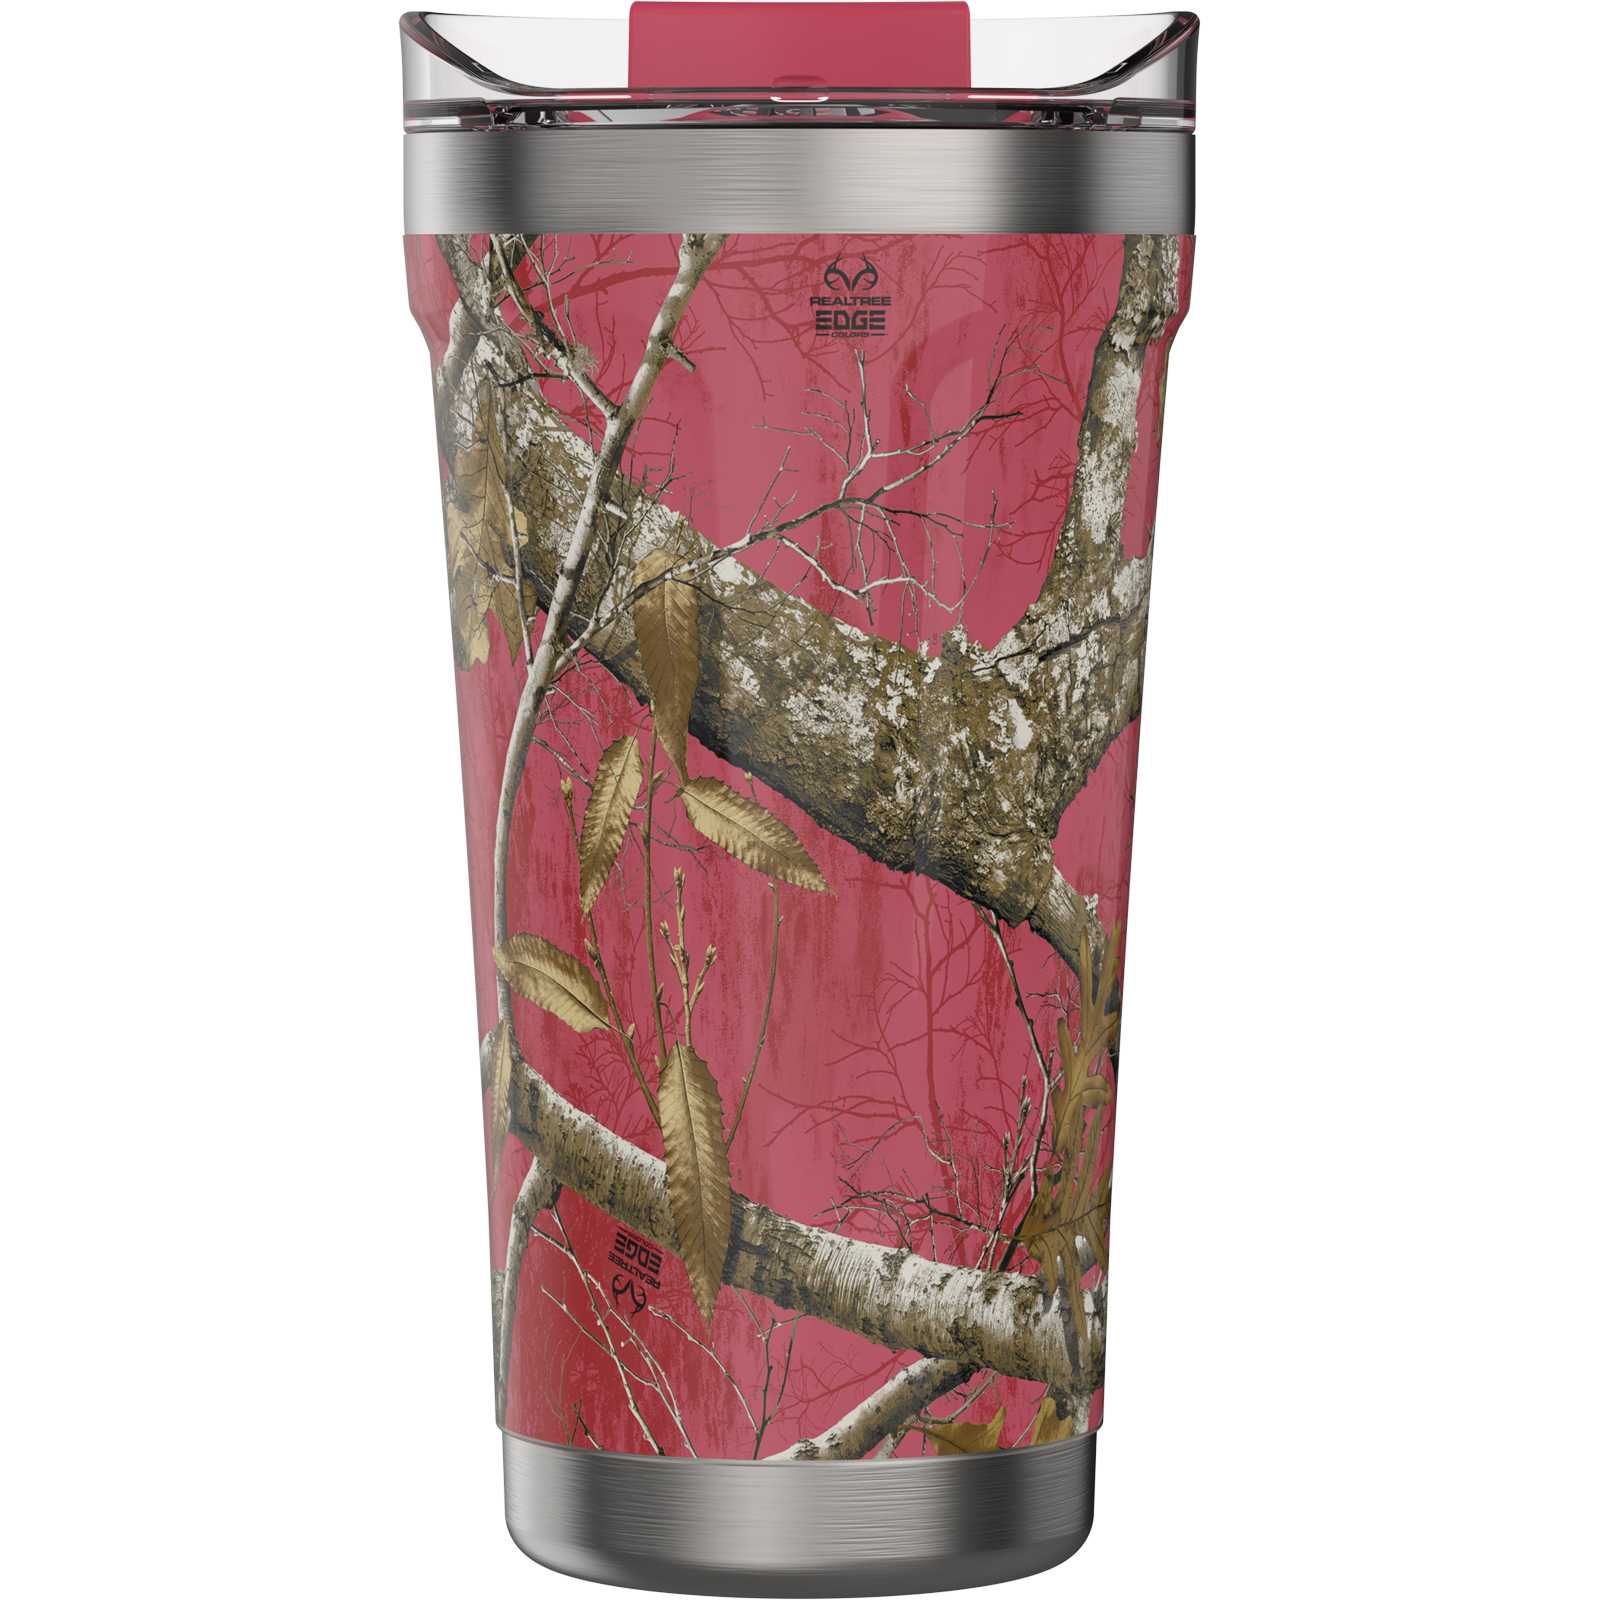 Steel Thermos 0,7L Pink Camo, Buy Steel Thermos 0,7L Pink Camo here